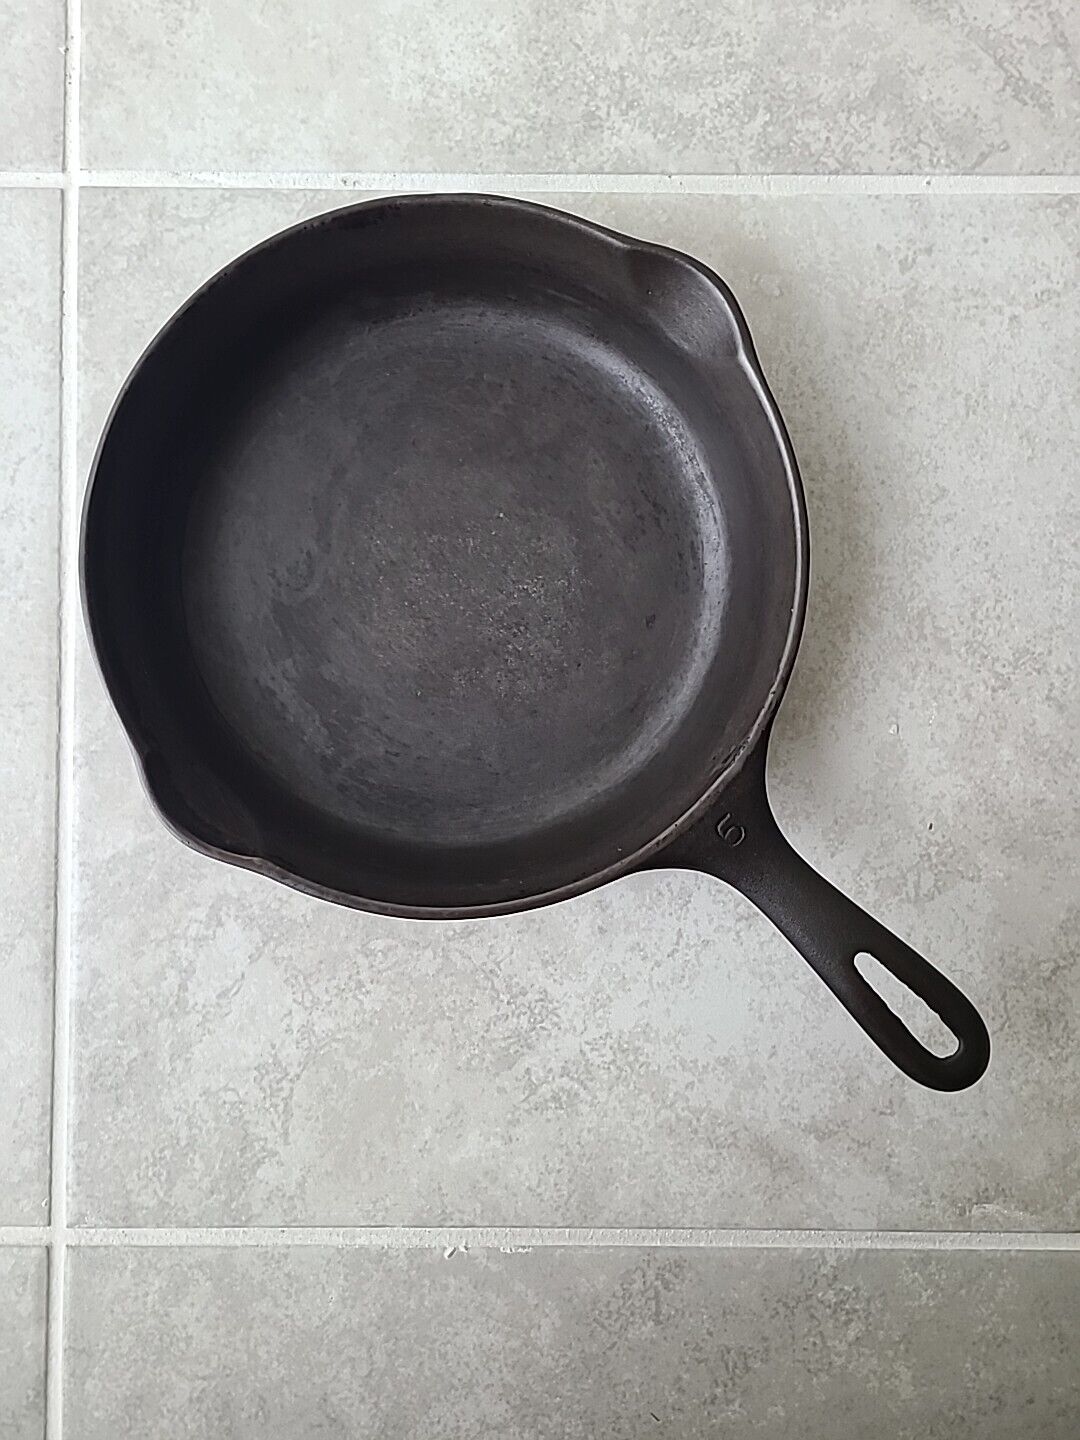 No. 6 Unmarked Wagner Ware 9 Inch Cast Iron Skillet - Smooth - H 